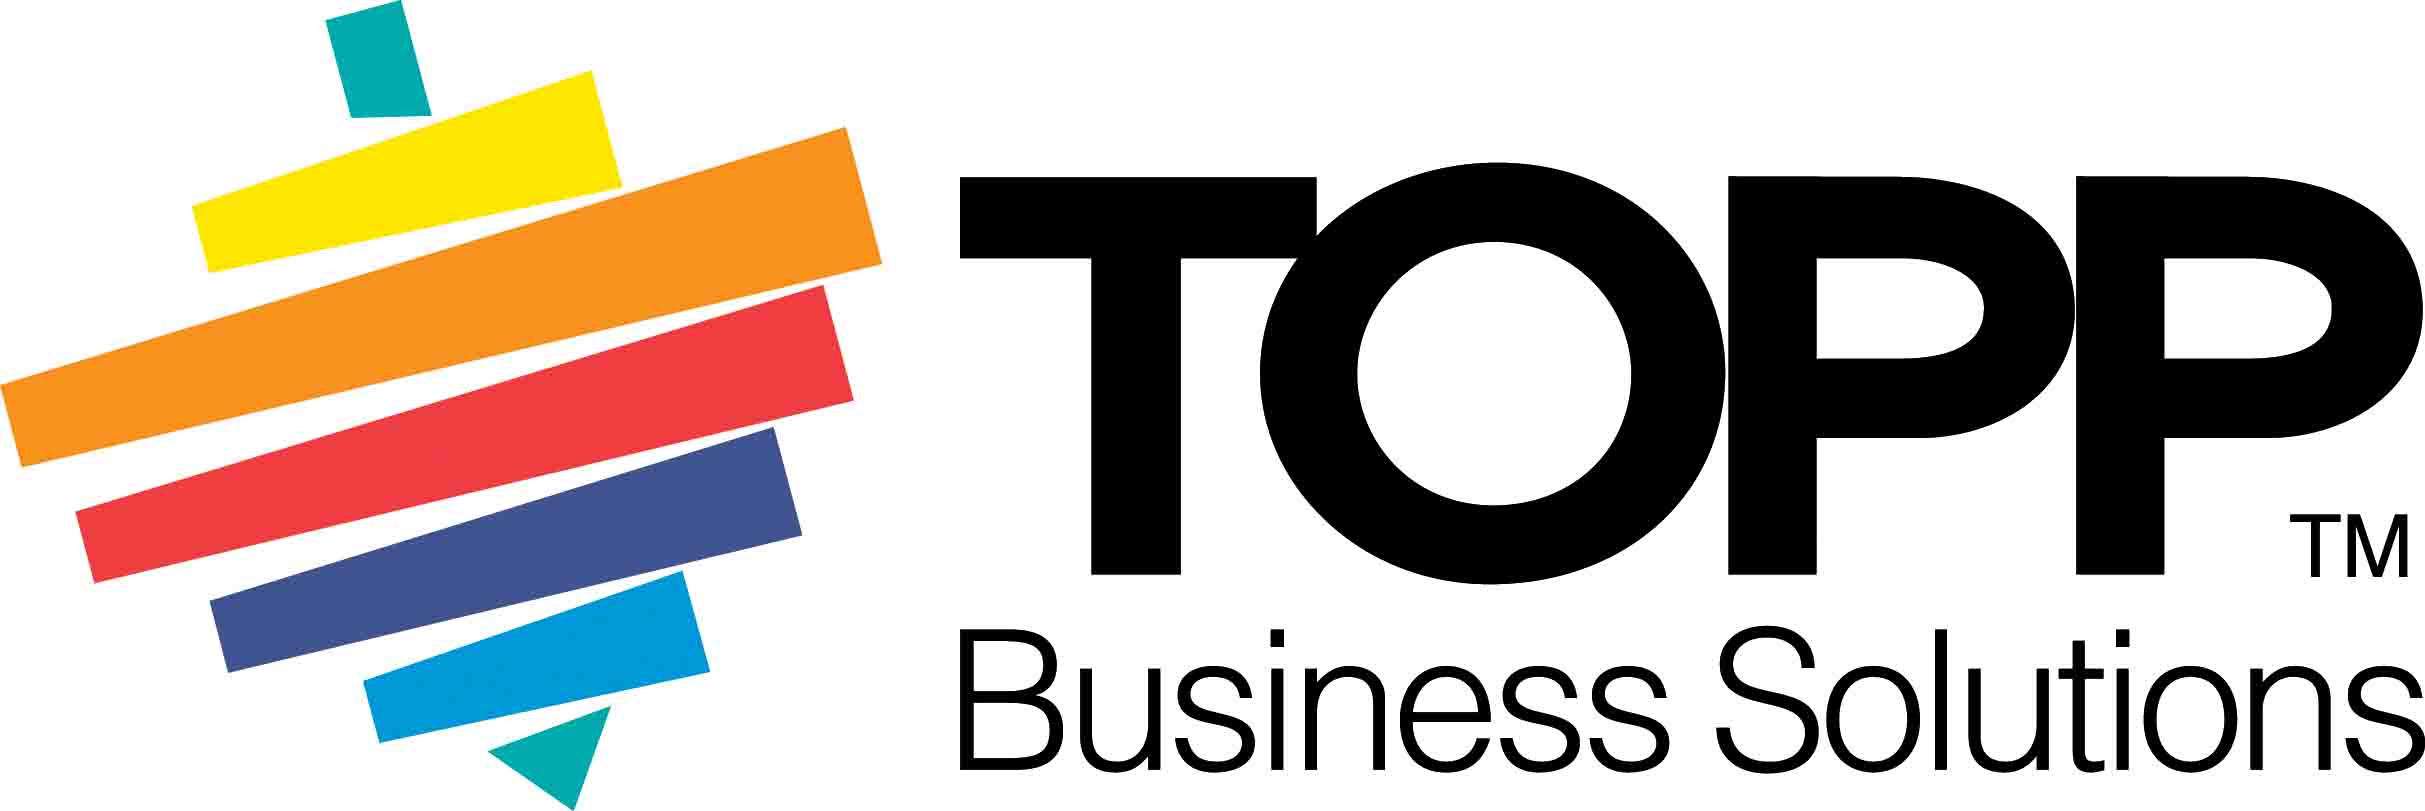 Topp Business Solutions 